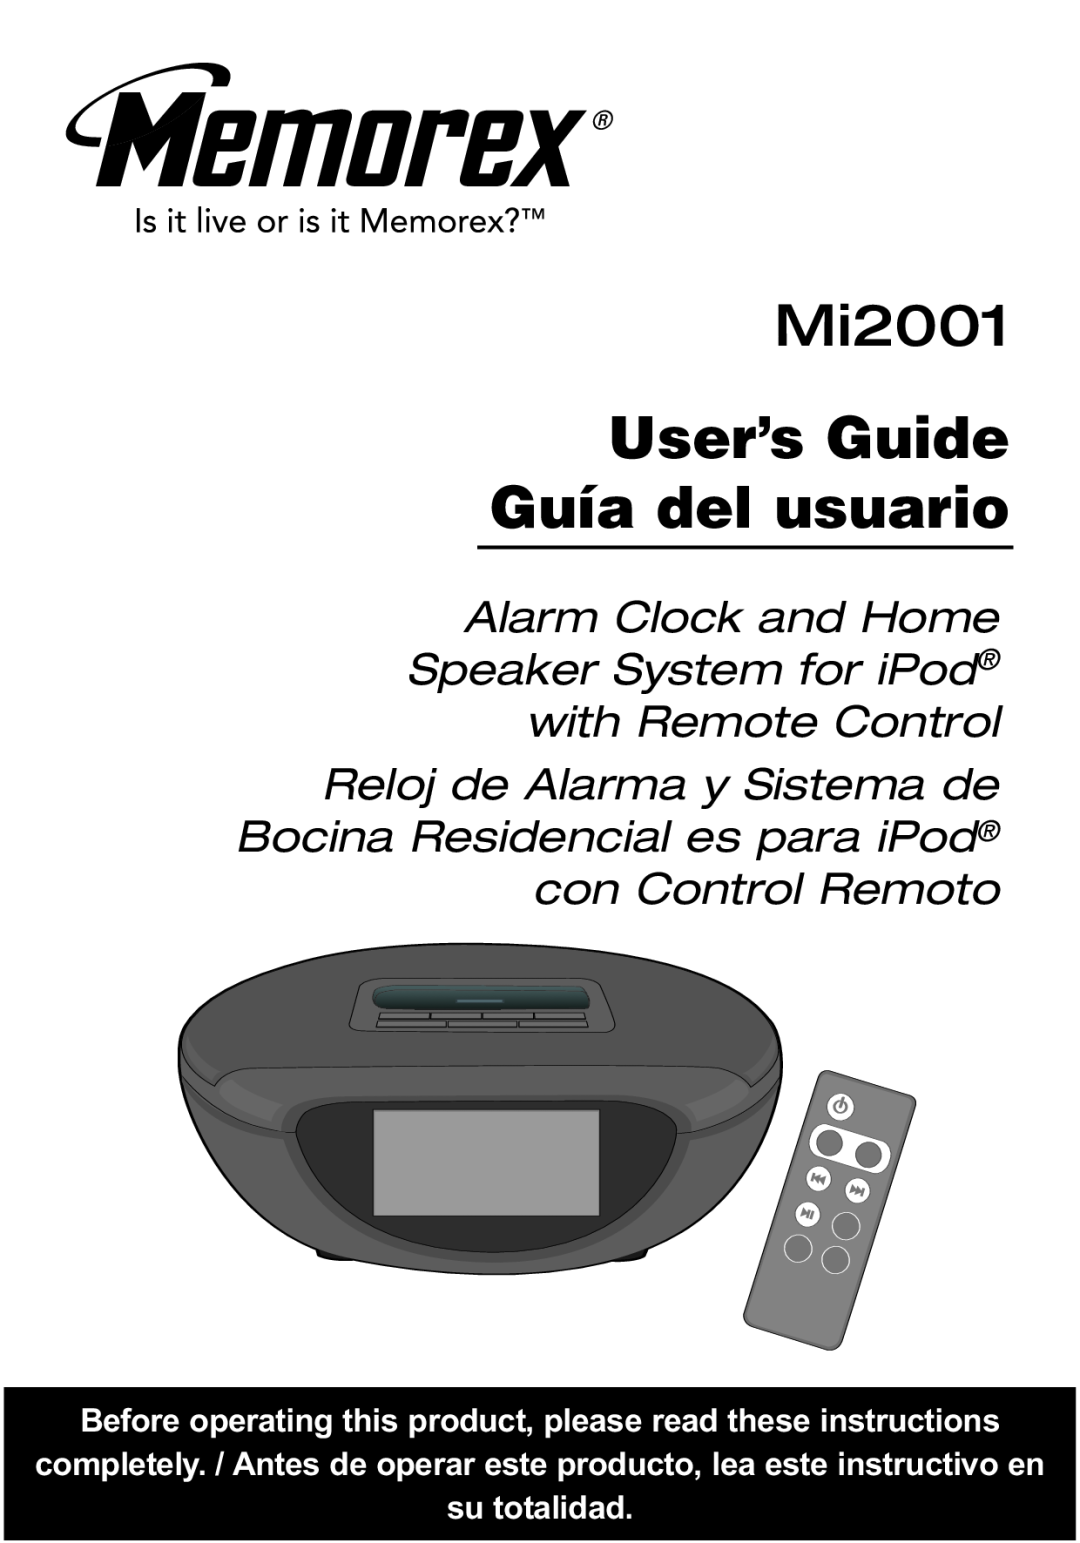 Memorex M12001 Mi2001, User’s Guide Guía del usuario, Alarm Clock and Home Speaker System for iPod with Remote Control 